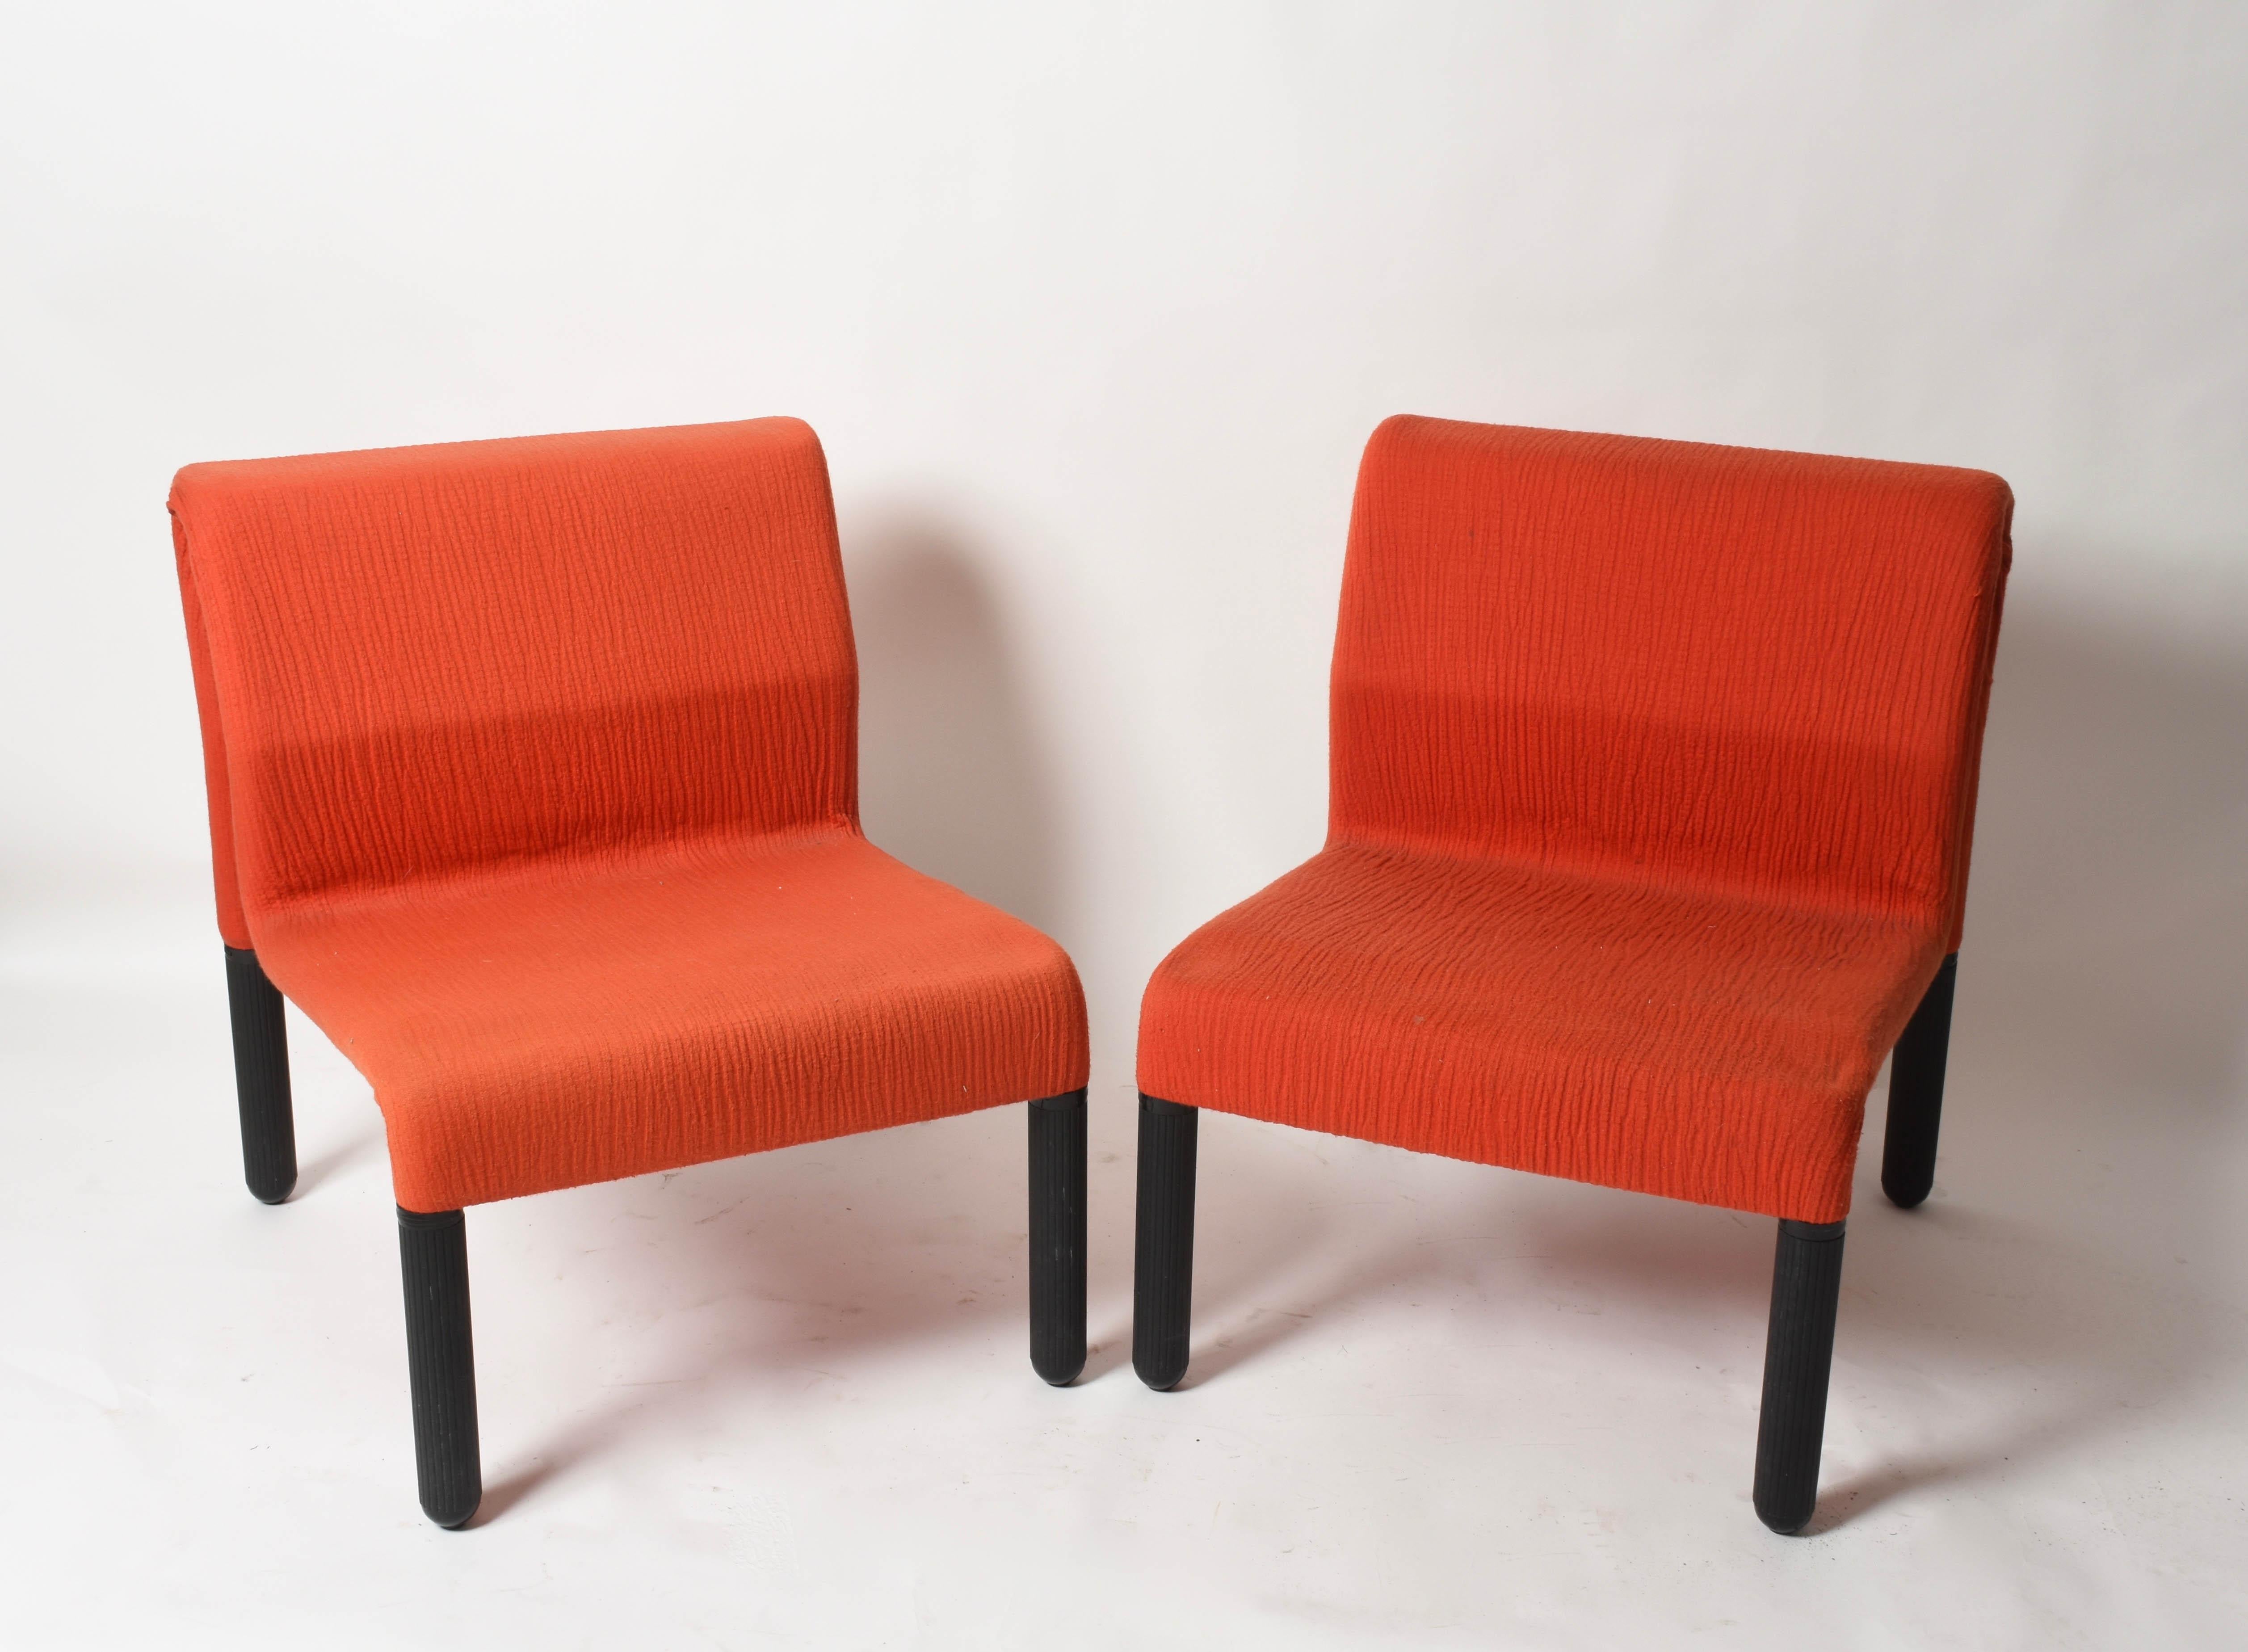 Late 20th Century Pair of Midcentury Red Fabric and Black Plastic Italian Armchairs, Menphis 1980s For Sale